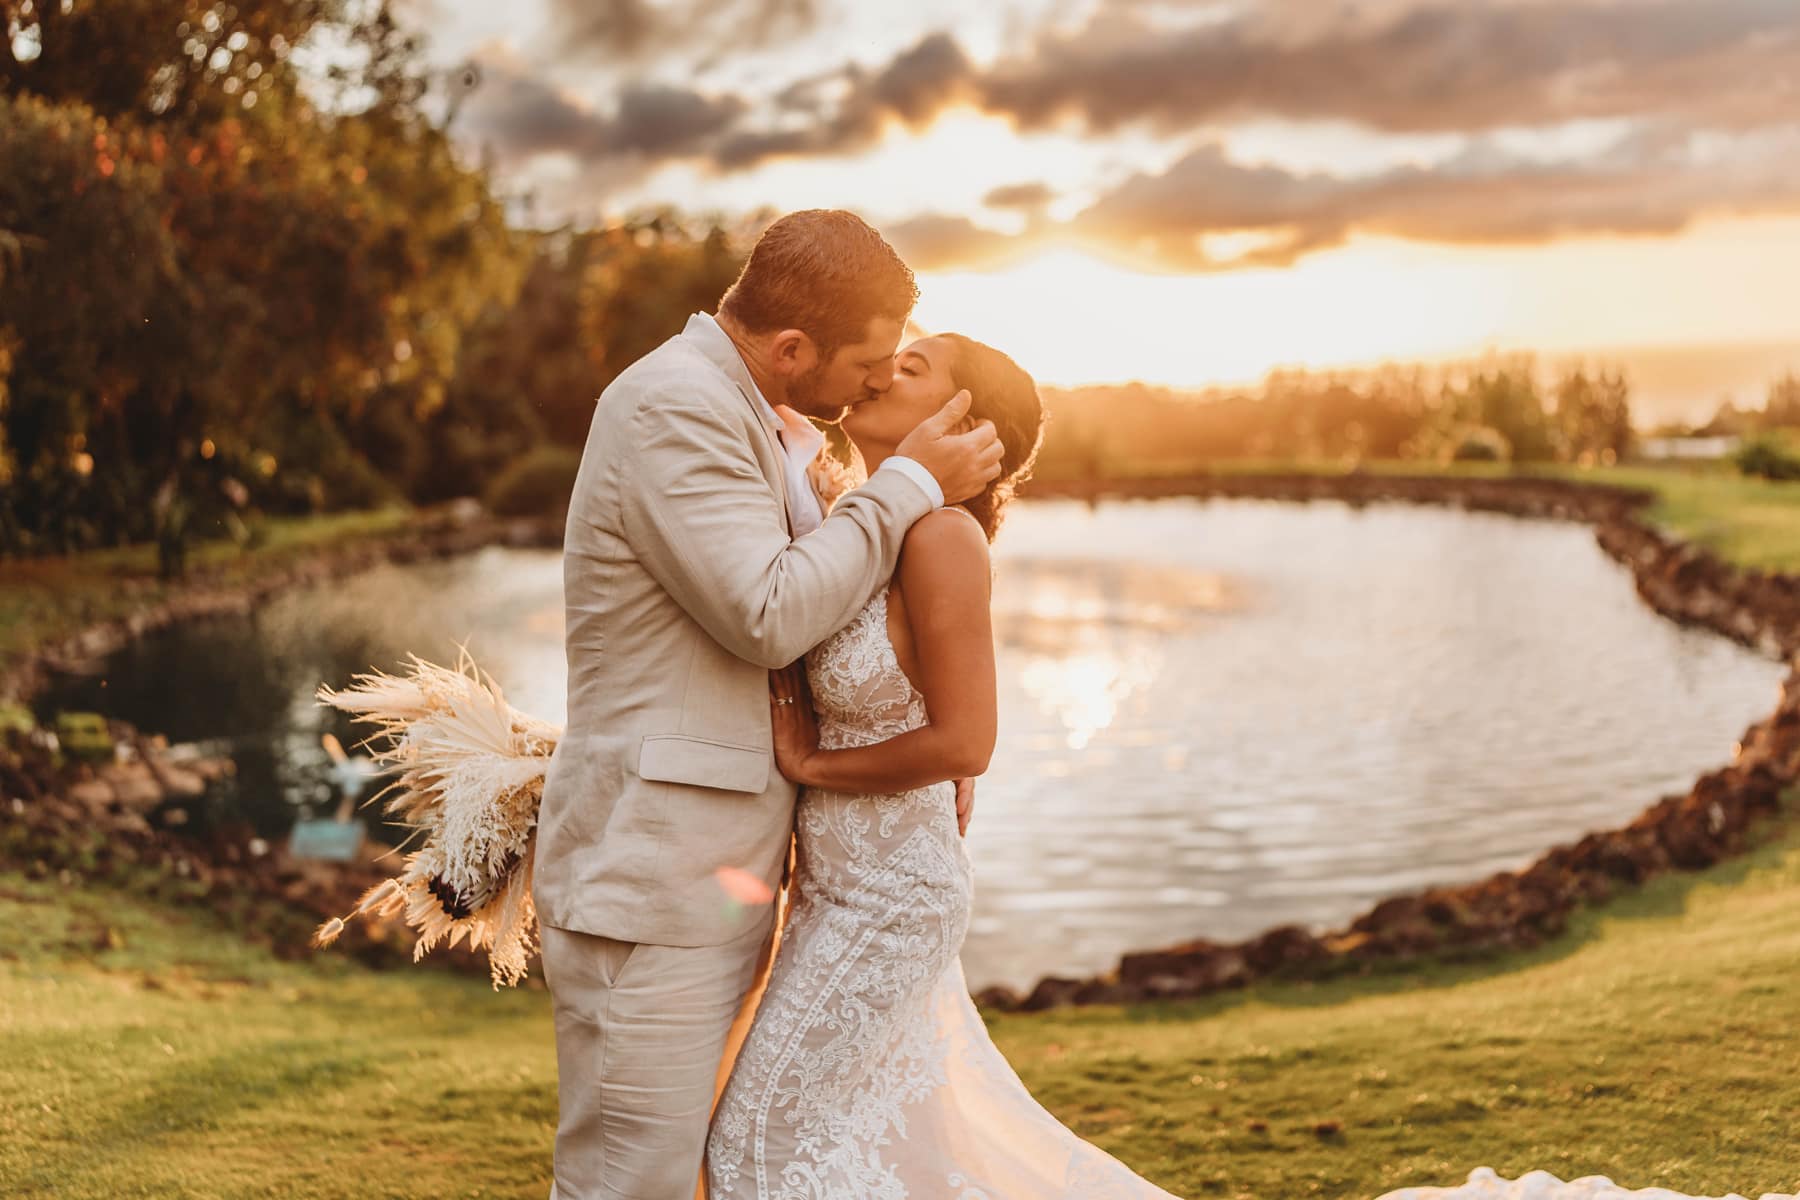 How To Elope In Hawaii, bride and groom kissing during sunset